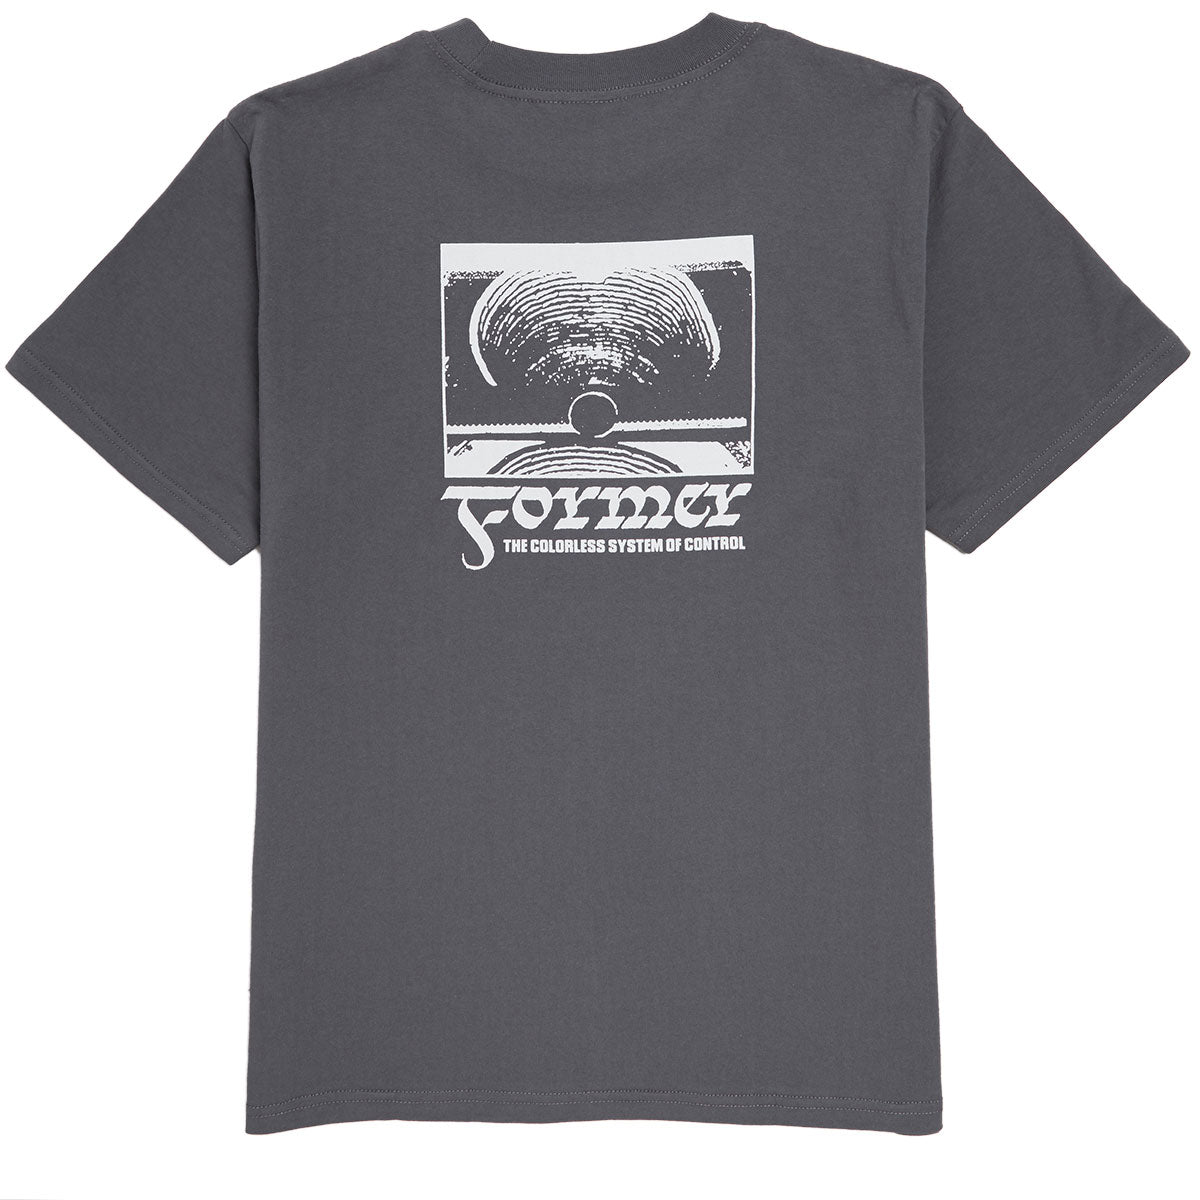 Former Crux Tribute T-Shirt - Iron image 1